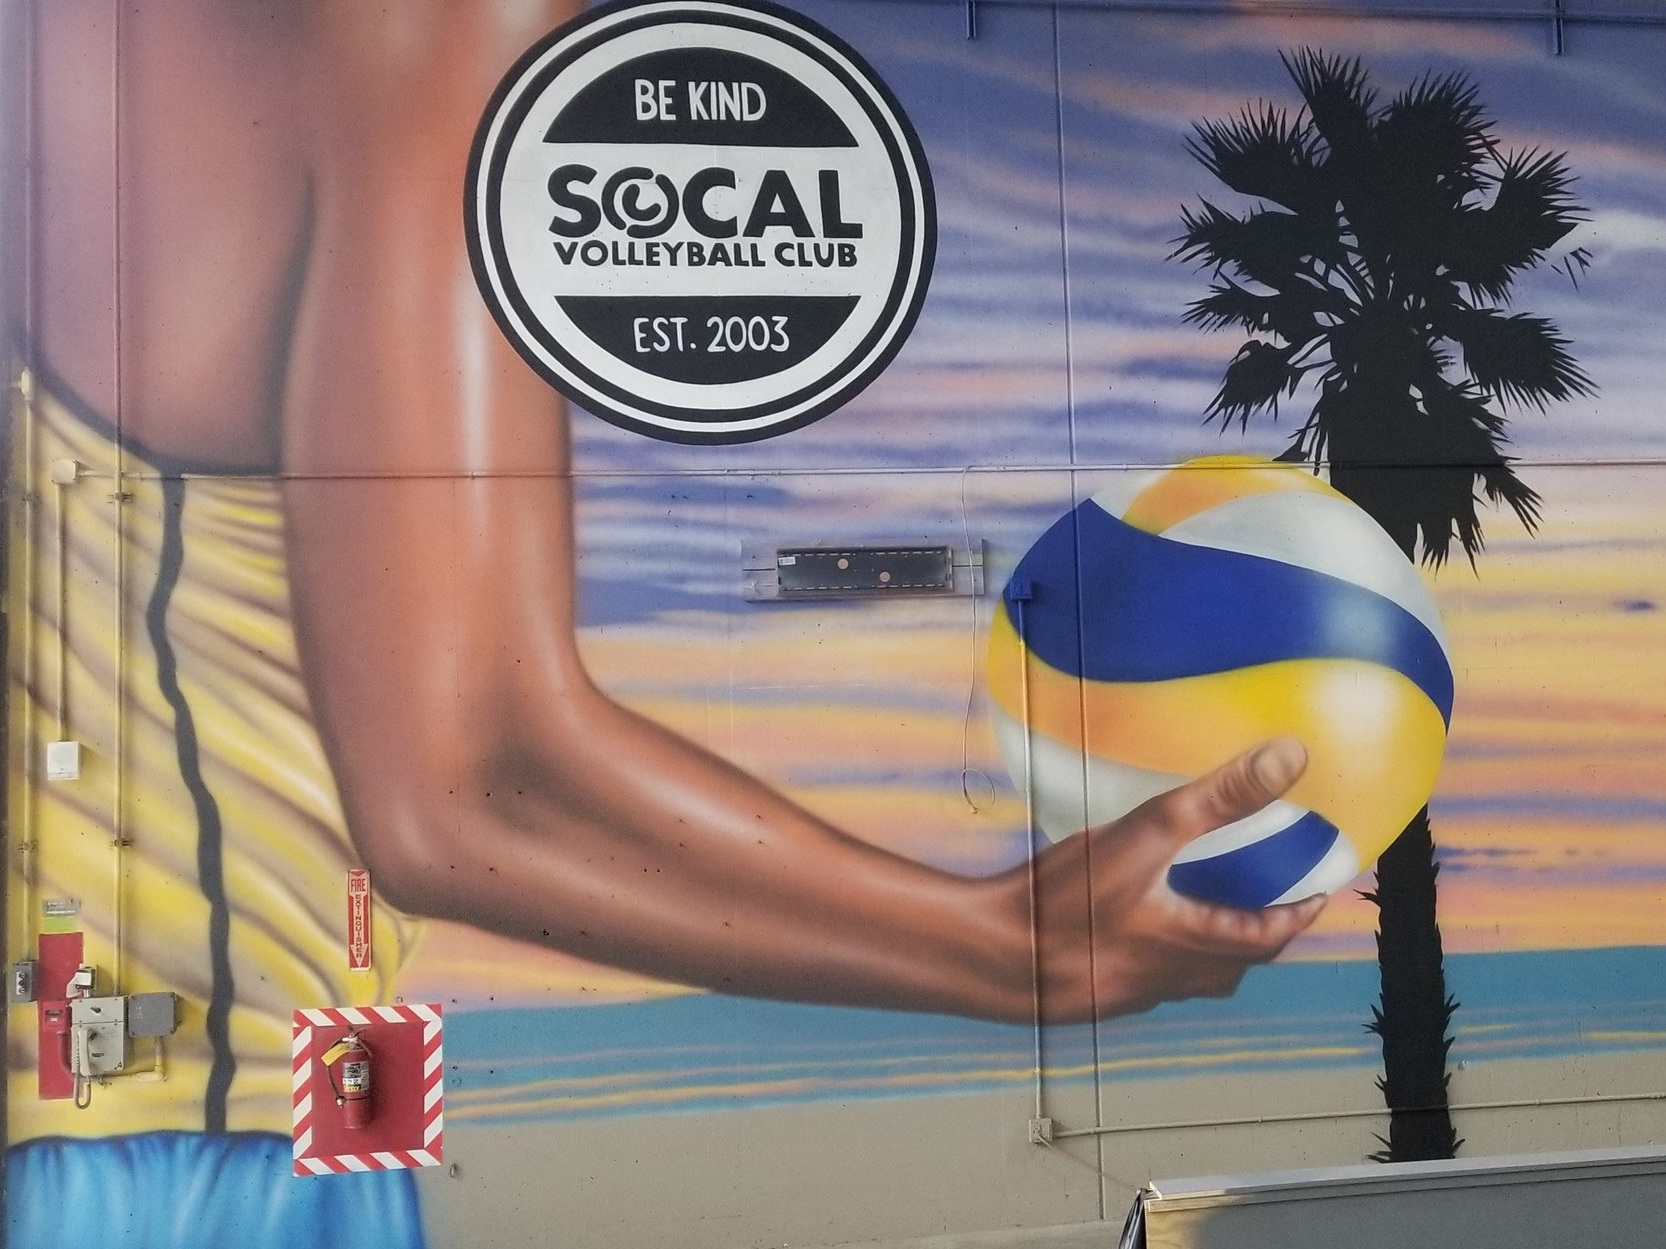 SoCal Volleyball Club Athletic Facility detail - California